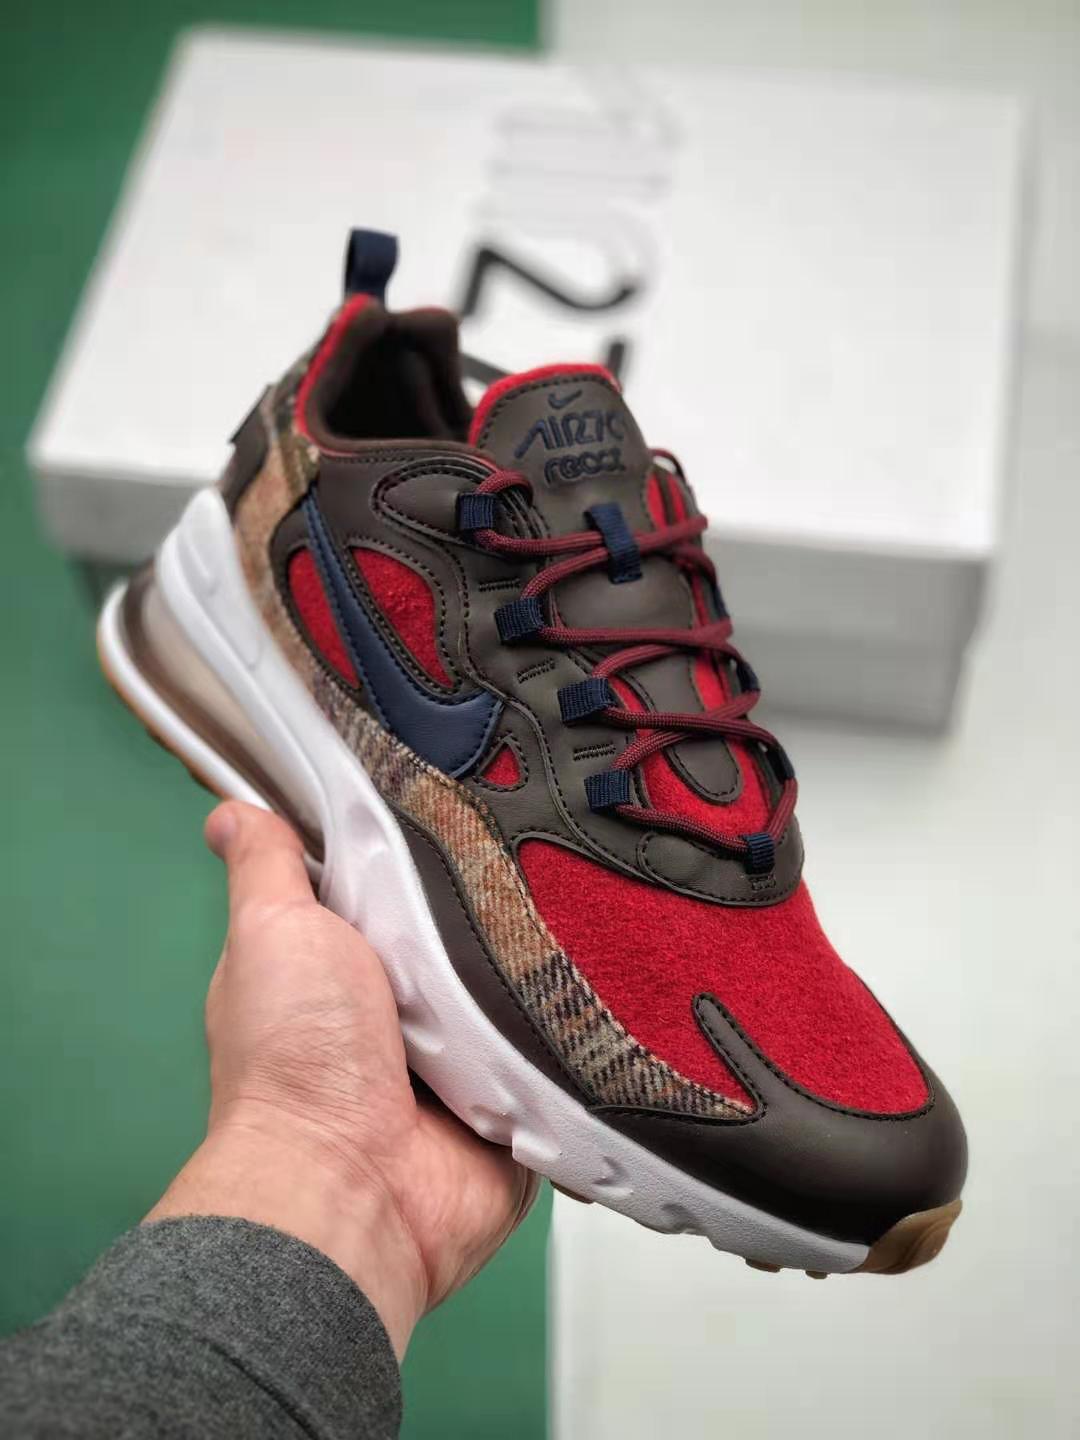 Nike Air Max 270 React Pendleton ID Multi Color CQ7388-991 - Stylish and Comfortable Footwear from Nike